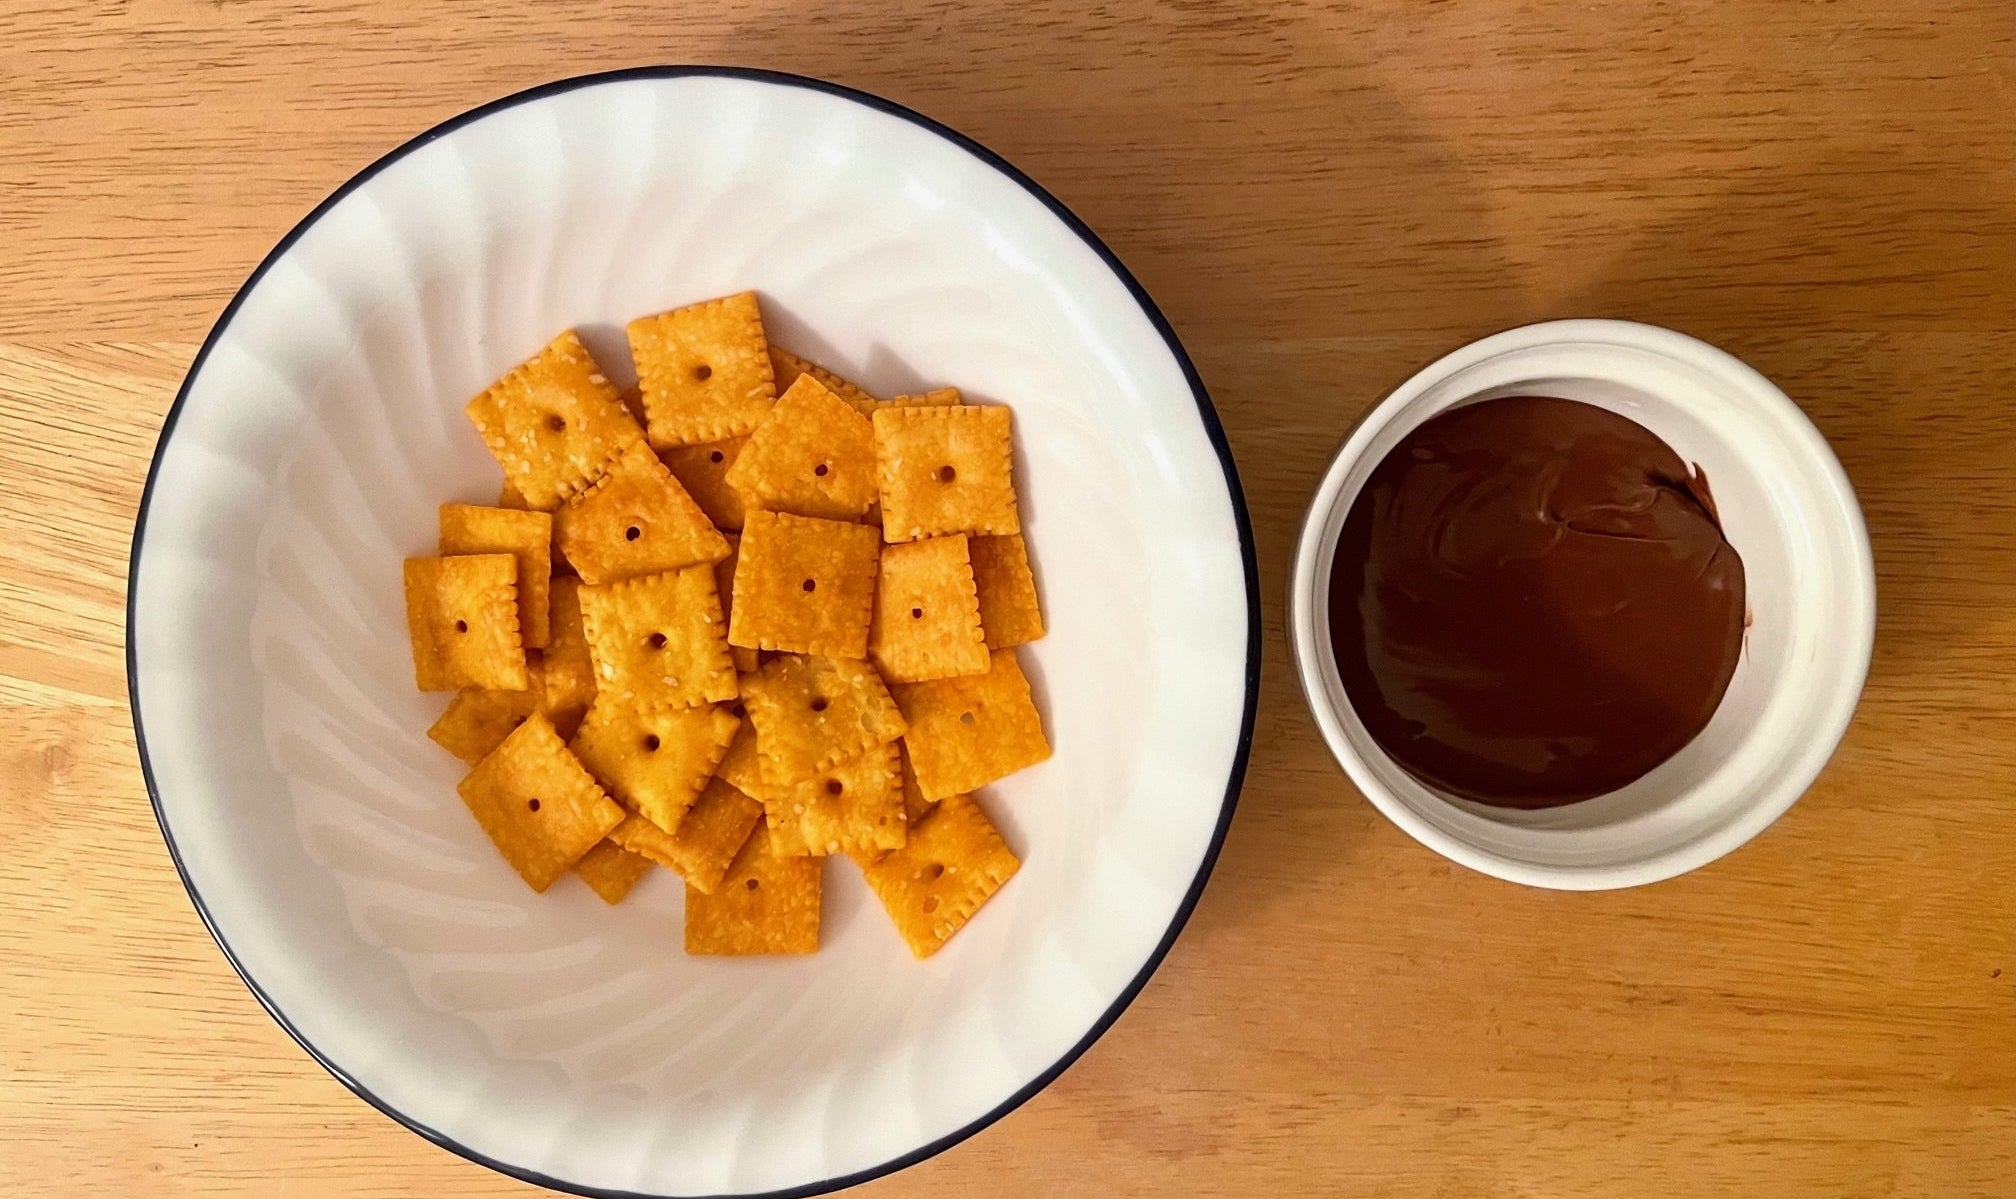 Cheez-its and Nutella